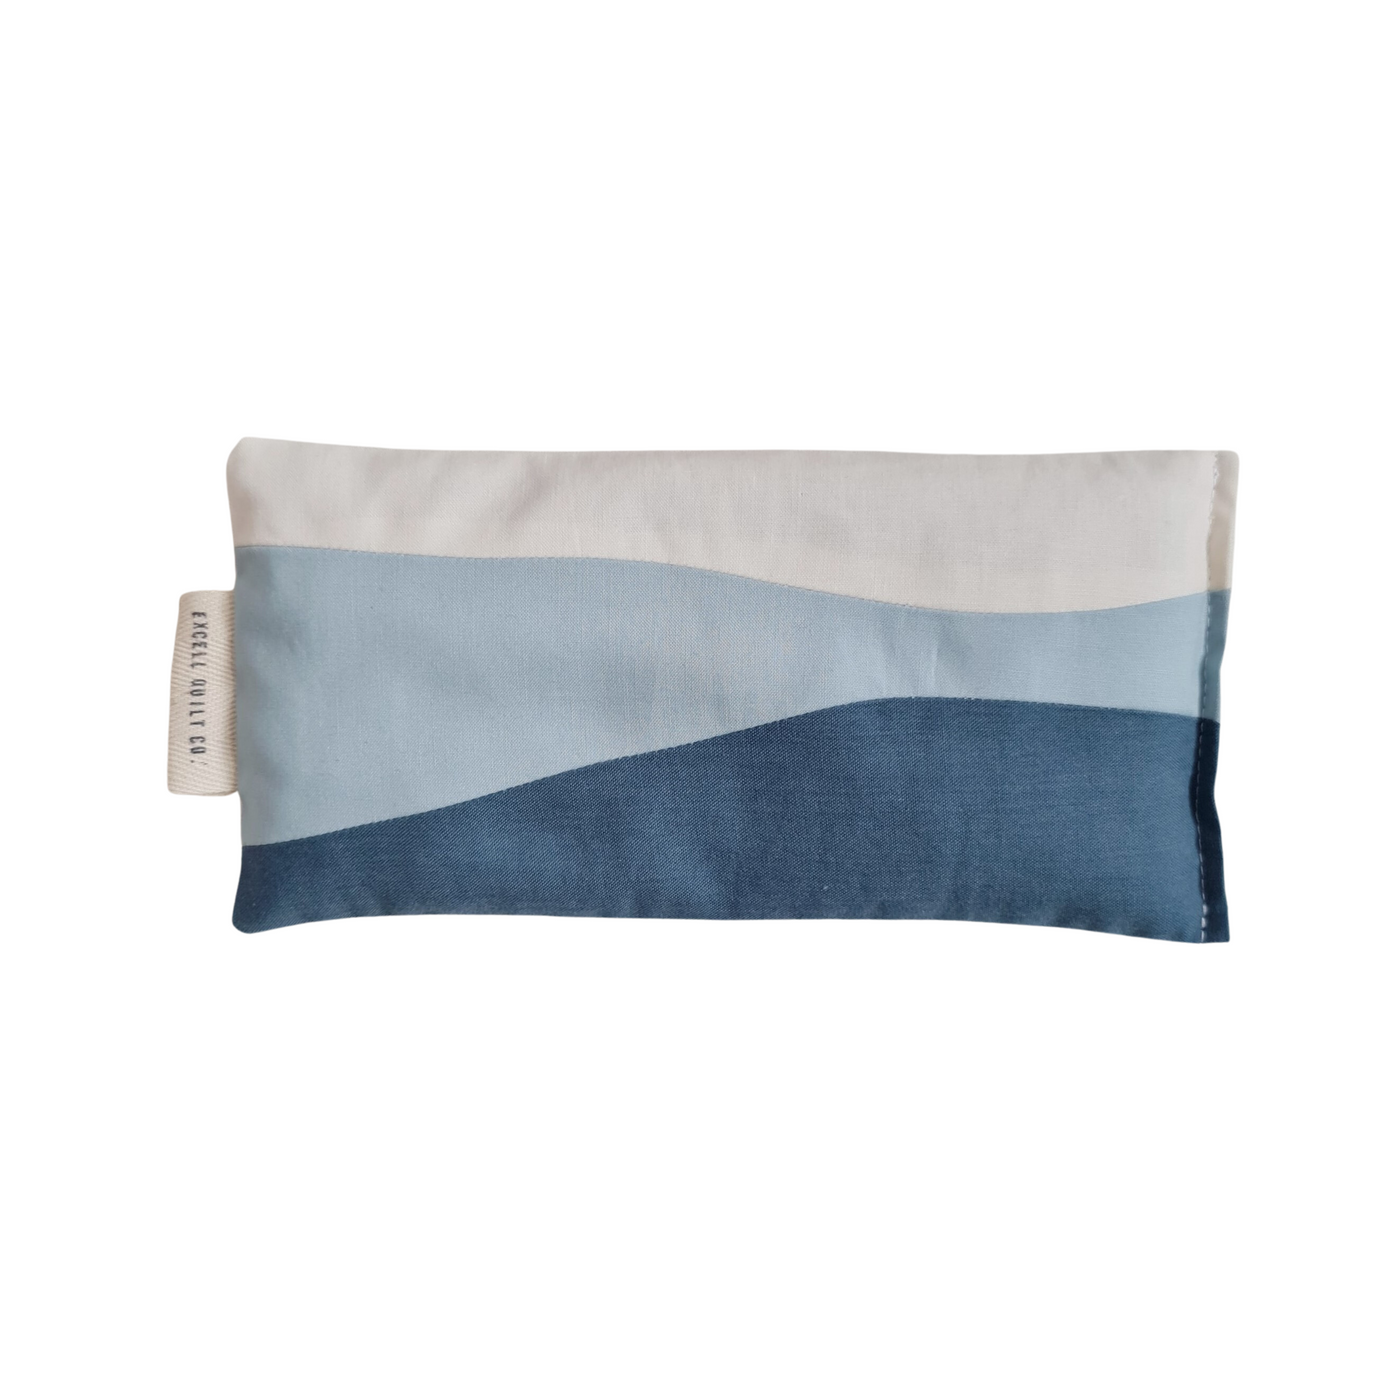 Excell Quilt Co Lavender Eye Pillow - Radical Giving